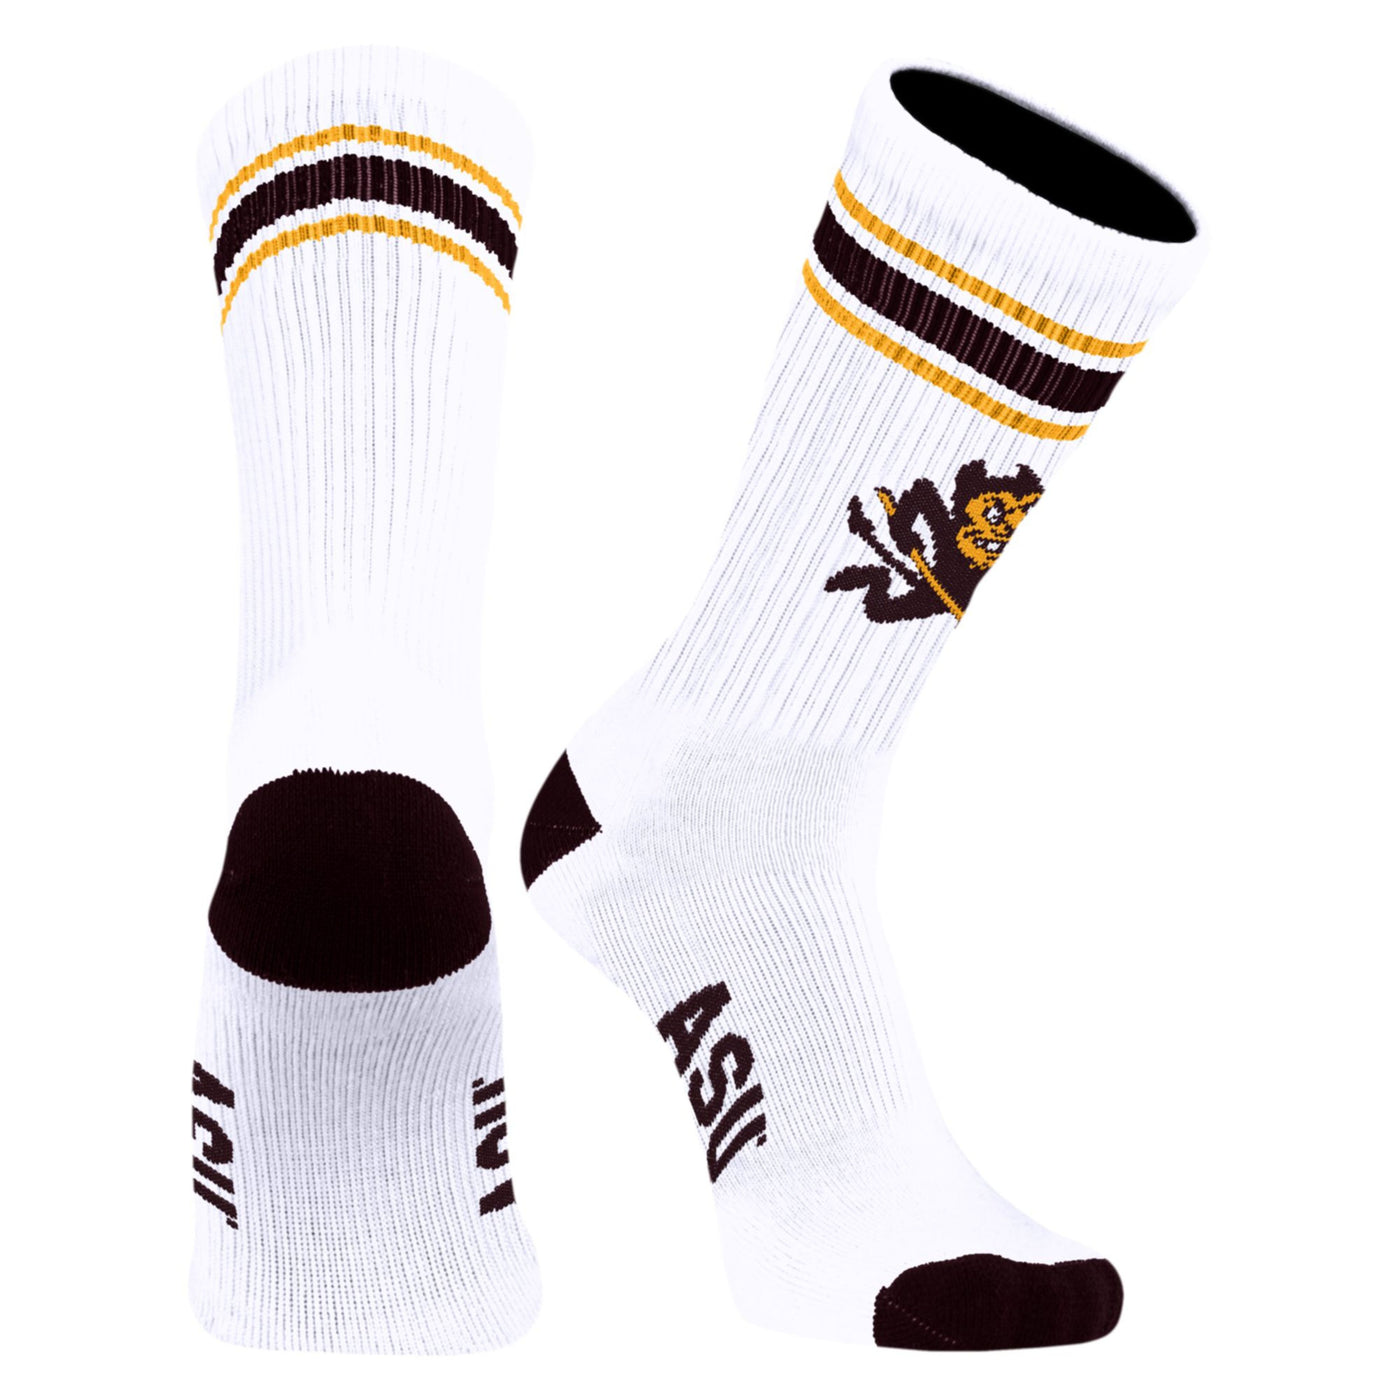 ASU white socks with 3 stripes at the top in maroon and gold above Sparky and maroon detailing on the heel, toe, and 'ASU' lettering